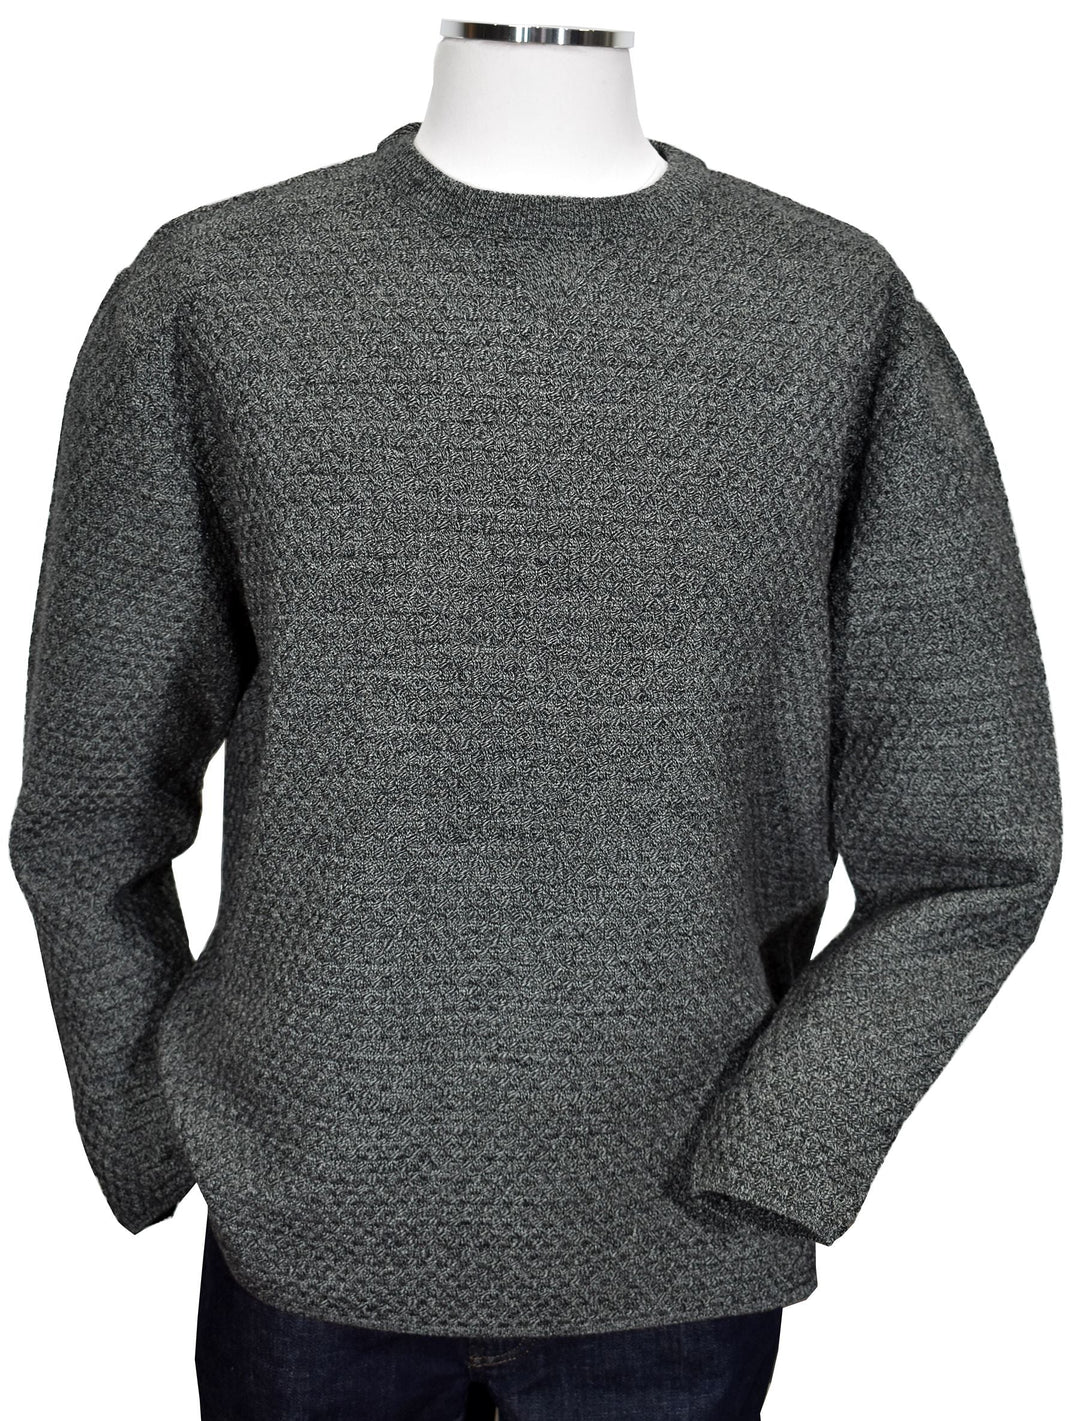 Marcello has a new take on the classic fisherman type knit sweater. The tonal jacquard stitching in mixed charcoal yarns creates an updated look to a classic. Contemporary styling yields the perfect mid weight item for classic or fashion looks.  Open tubular sleeve and bottom.  Extra fine Italian merino wool blended fabric.  Classic fit.